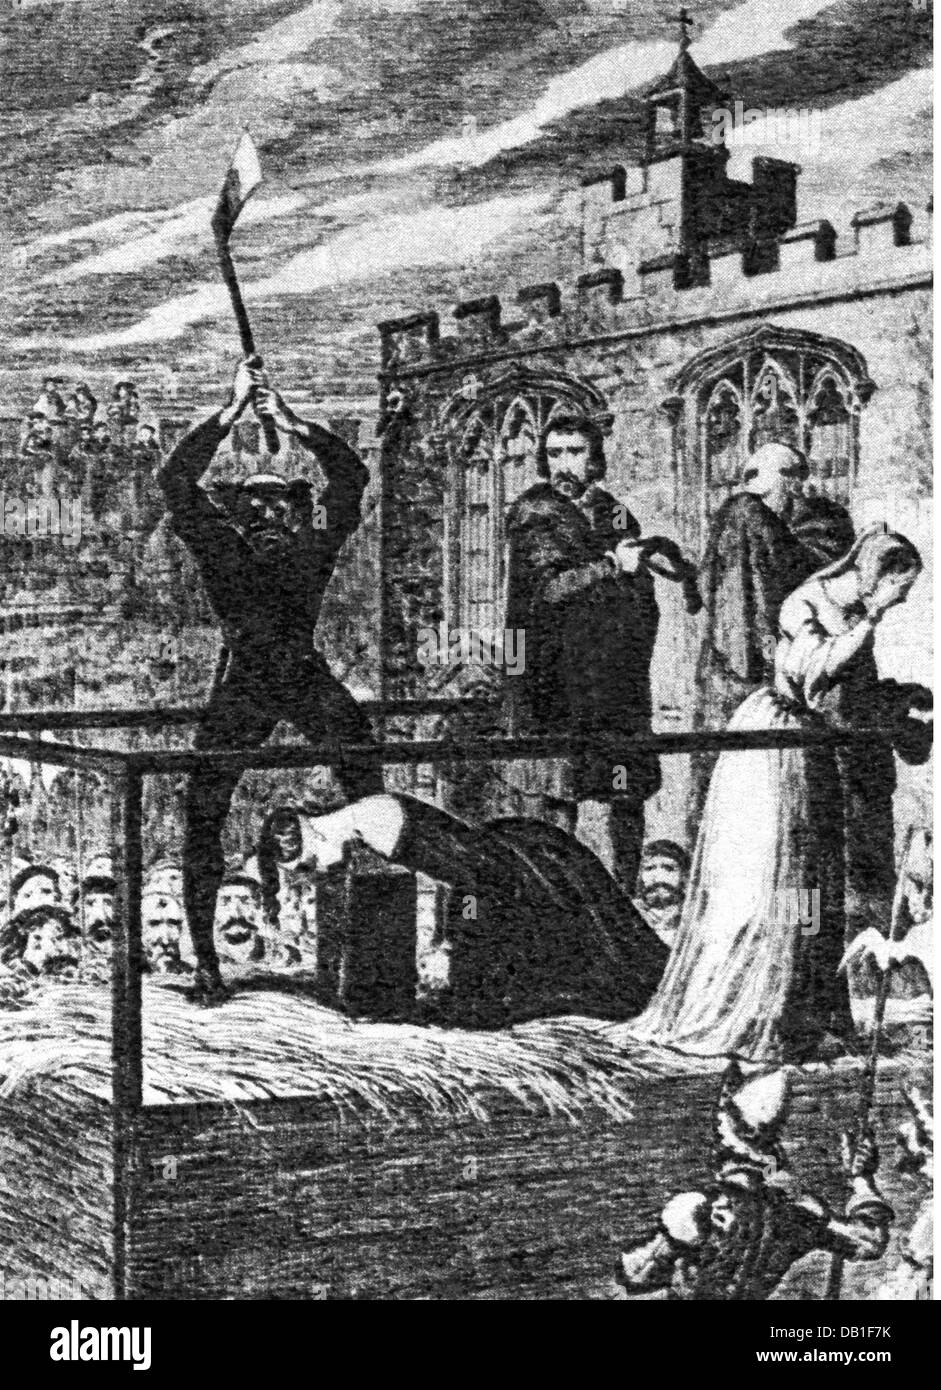 justice, penitentiary system, beheading, execution of Lady Jane Grey, Tower, London, engraving by George Cruikshank (1792 - 1878), 19th century, 16th century, graphic, graphics, Great Britain, Tudor period, jurisdiction, penalties, punishment, punishments, death penalty, executioner, executioners, decapitator, decapitators, hangman, hangmen, executioner's axe, axe, axes, ax, block, decapitation, scaffold, scaffolds, Lady Jane Grey (1536 / 1537 - 1554), for a few days queen of England 1553, Additional-Rights-Clearences-Not Available Stock Photo